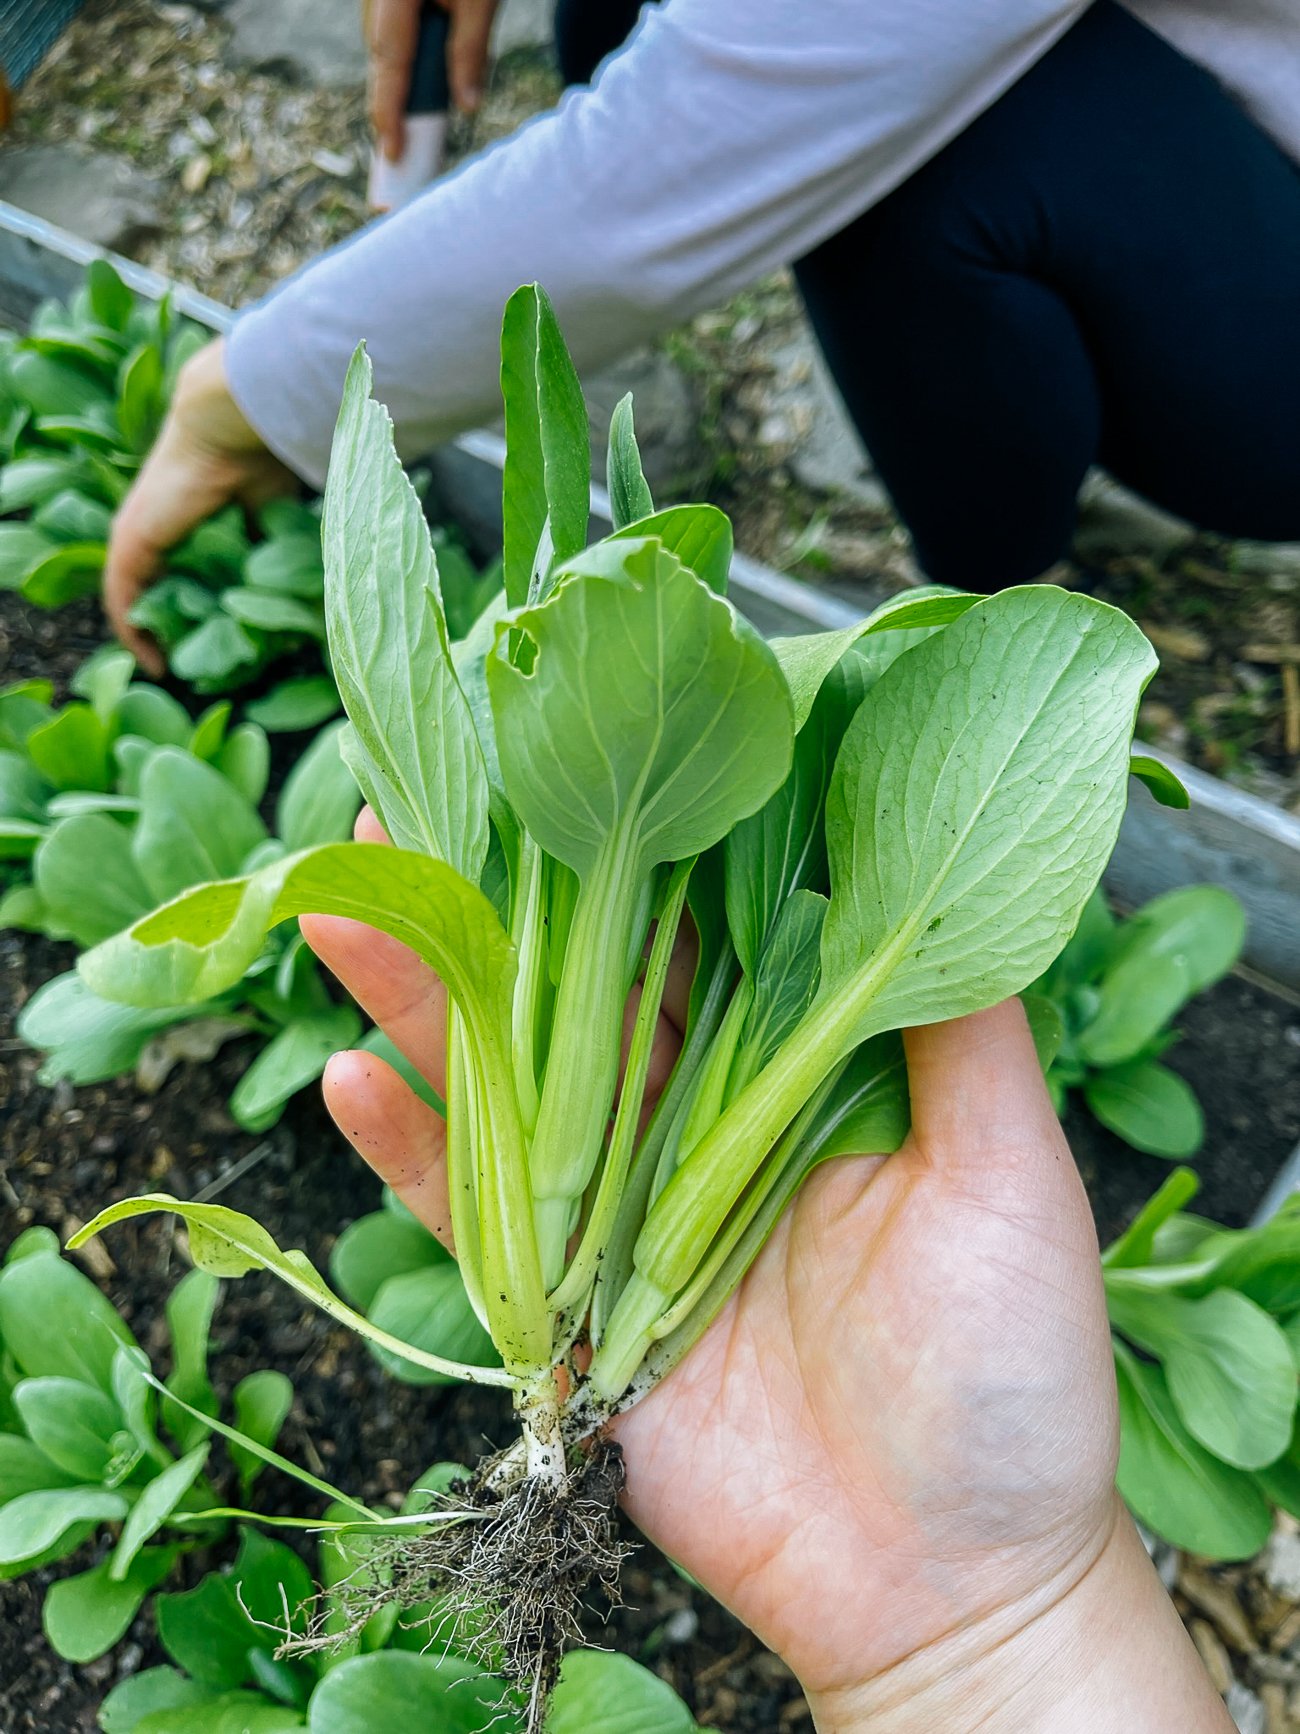 Holding a small bok choy plant